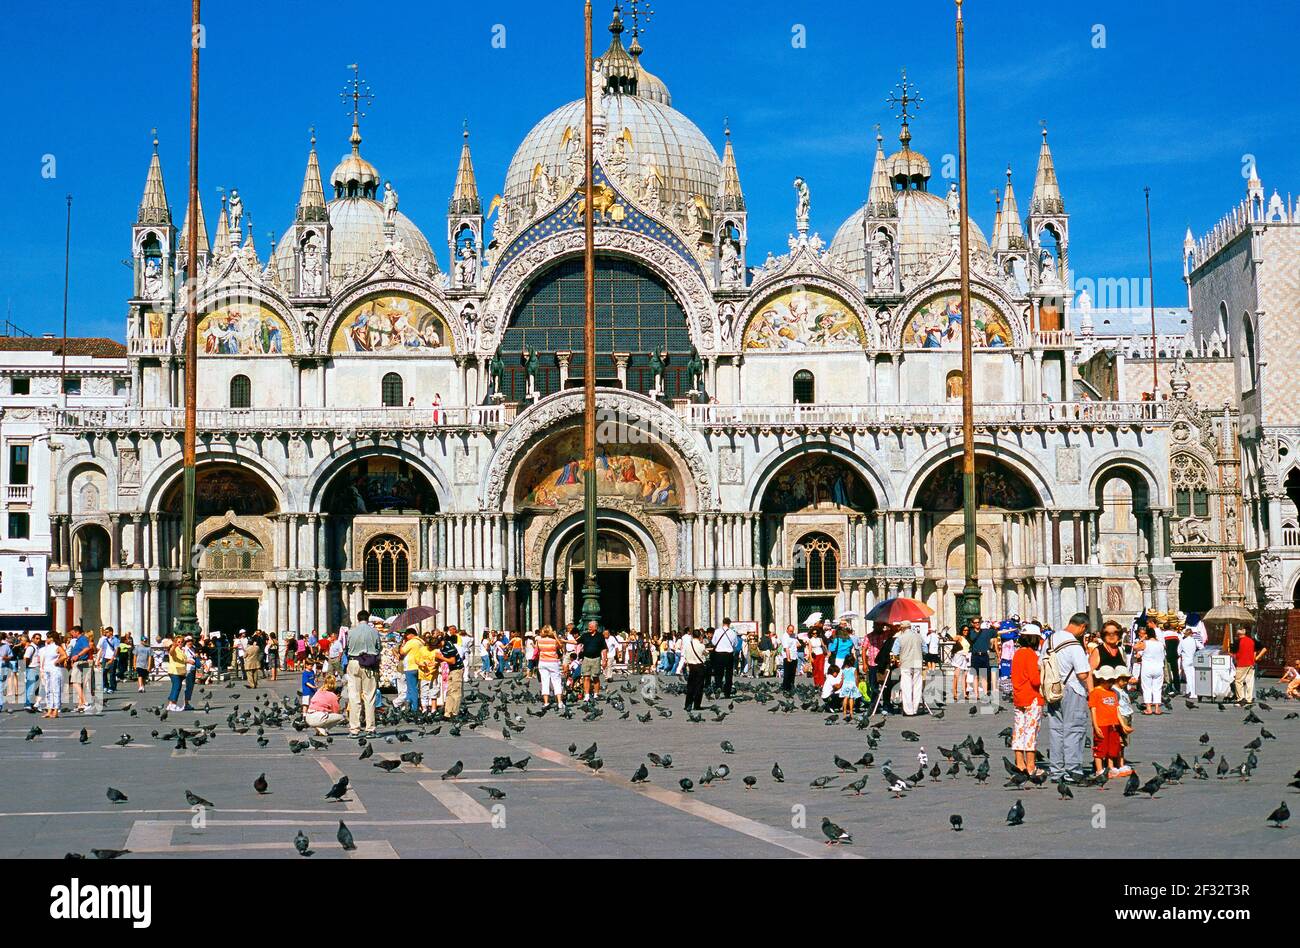 Basilica di San Marco is the most famous of the many churches in Venice and one of the finest examples of Byzantine architecture in the world. Stock Photo